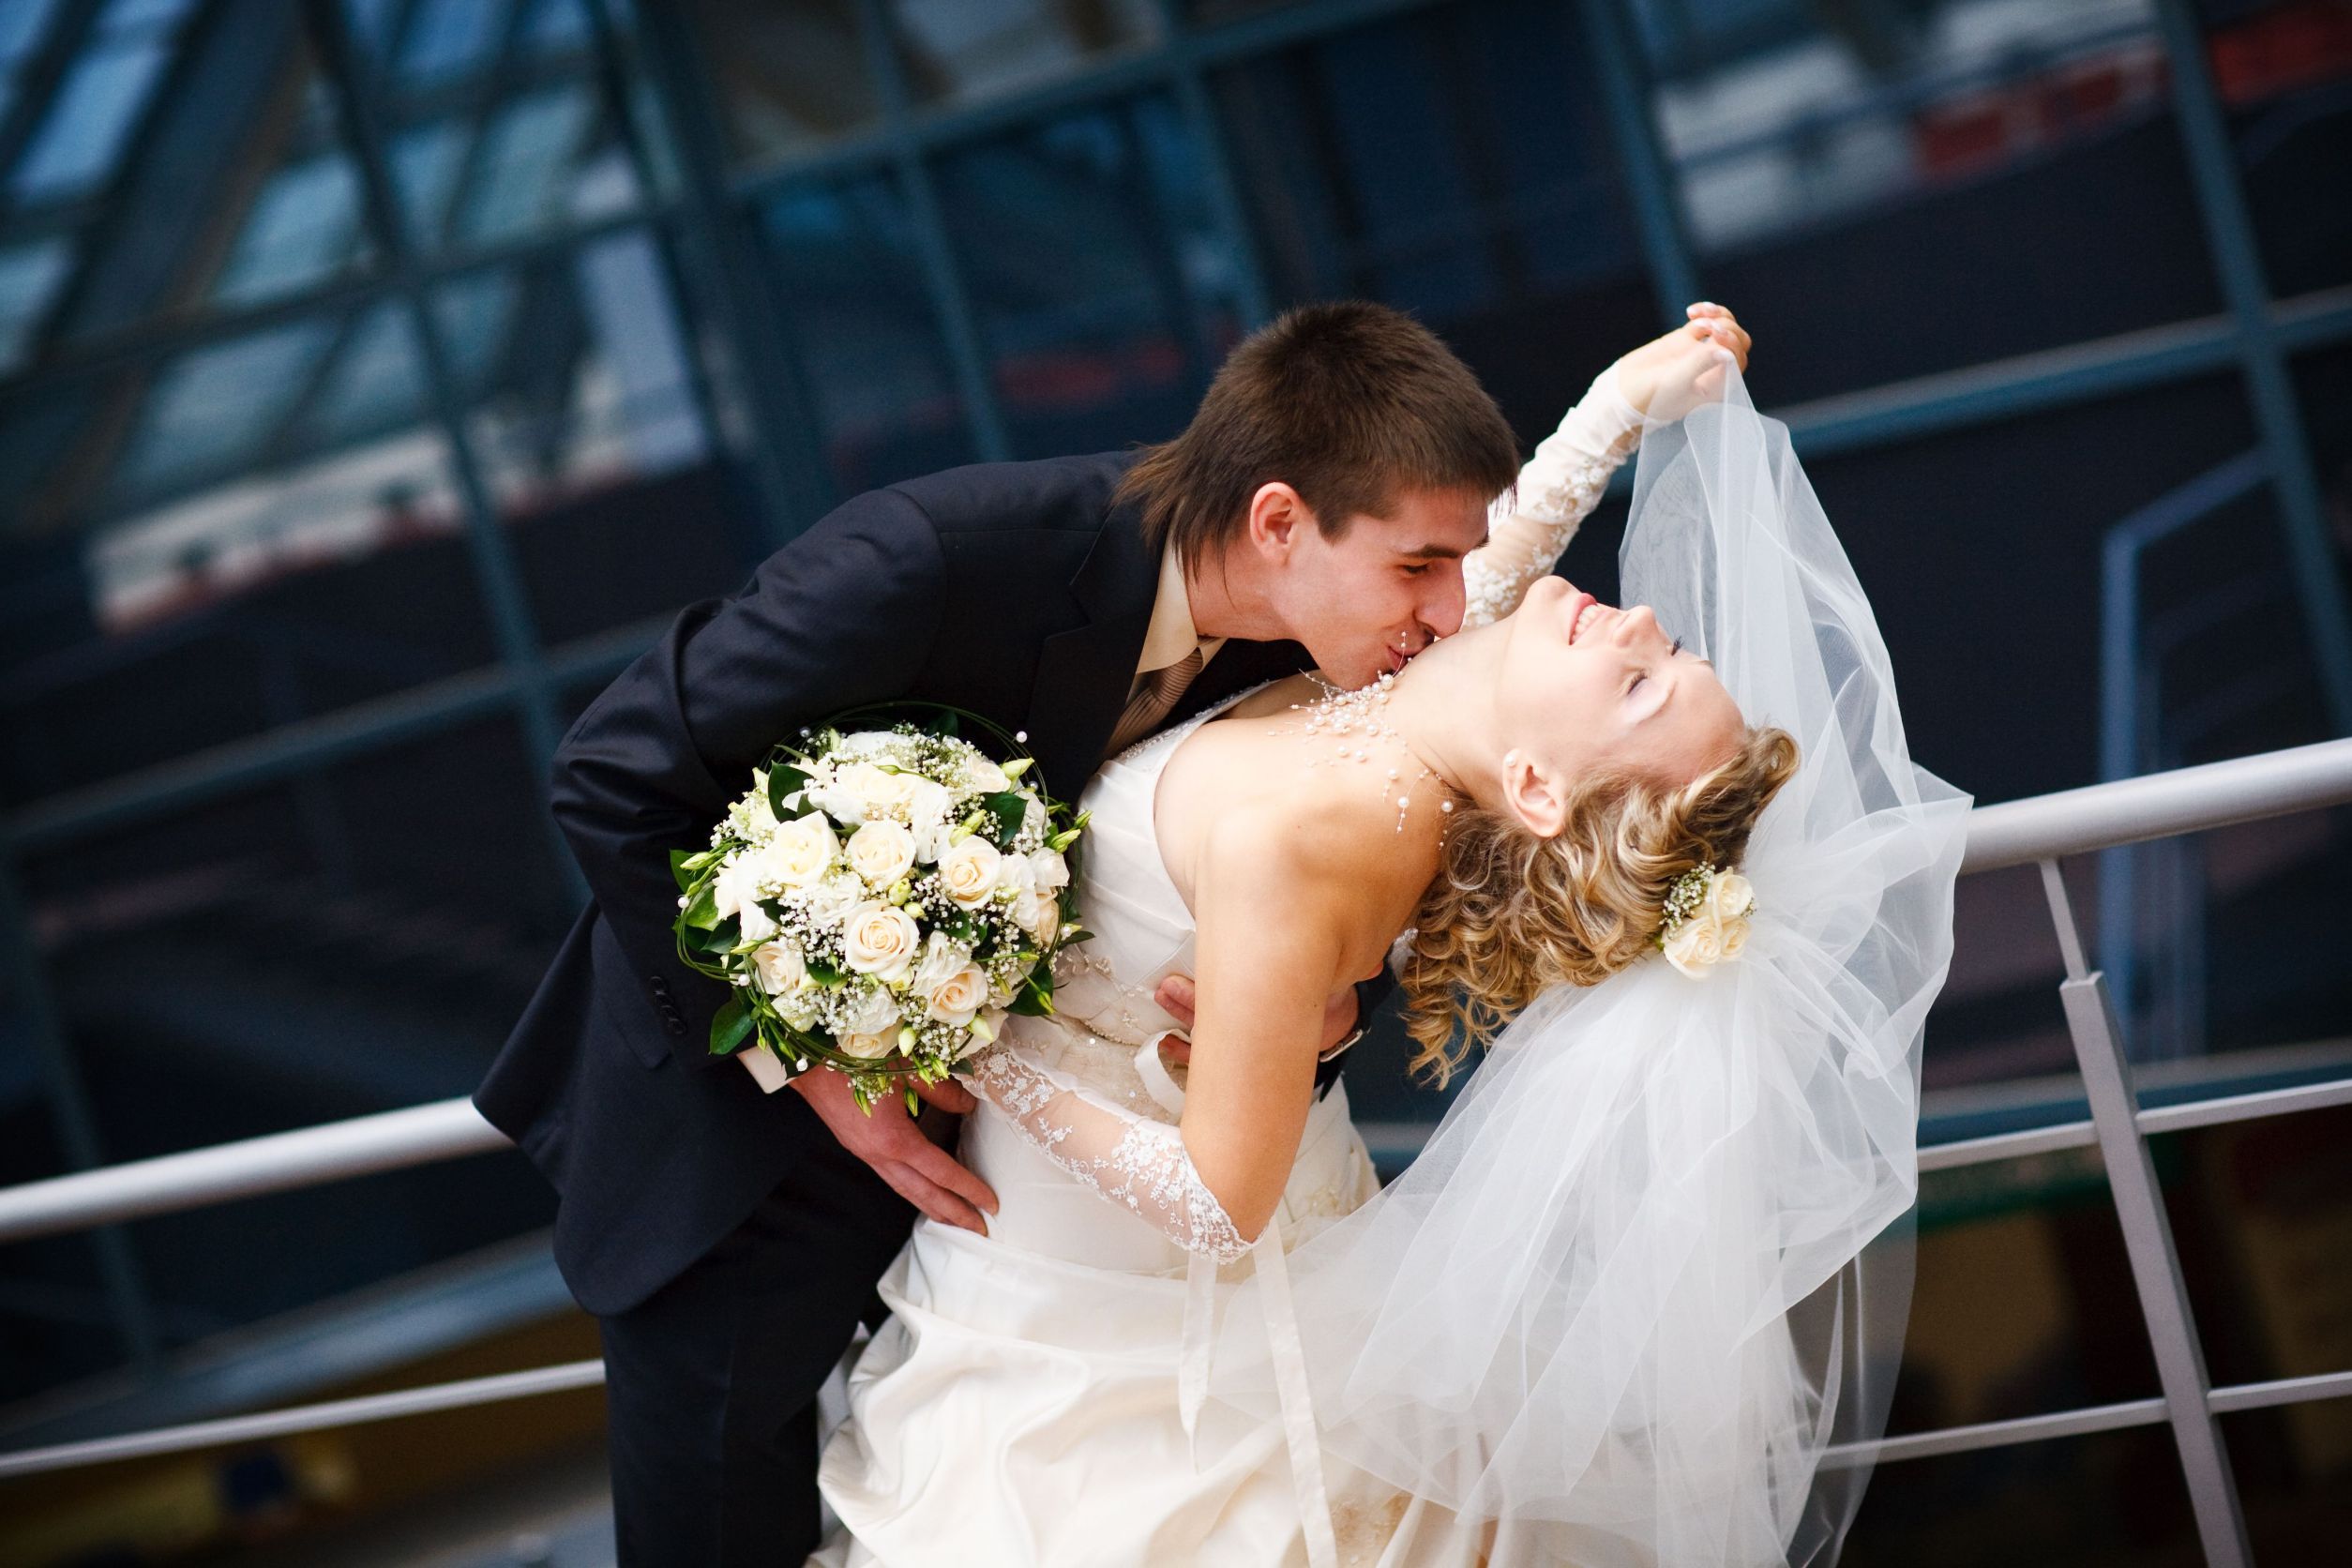 Professional Wedding Photographers – Austin TX Couples Have a Tough Choice to Make